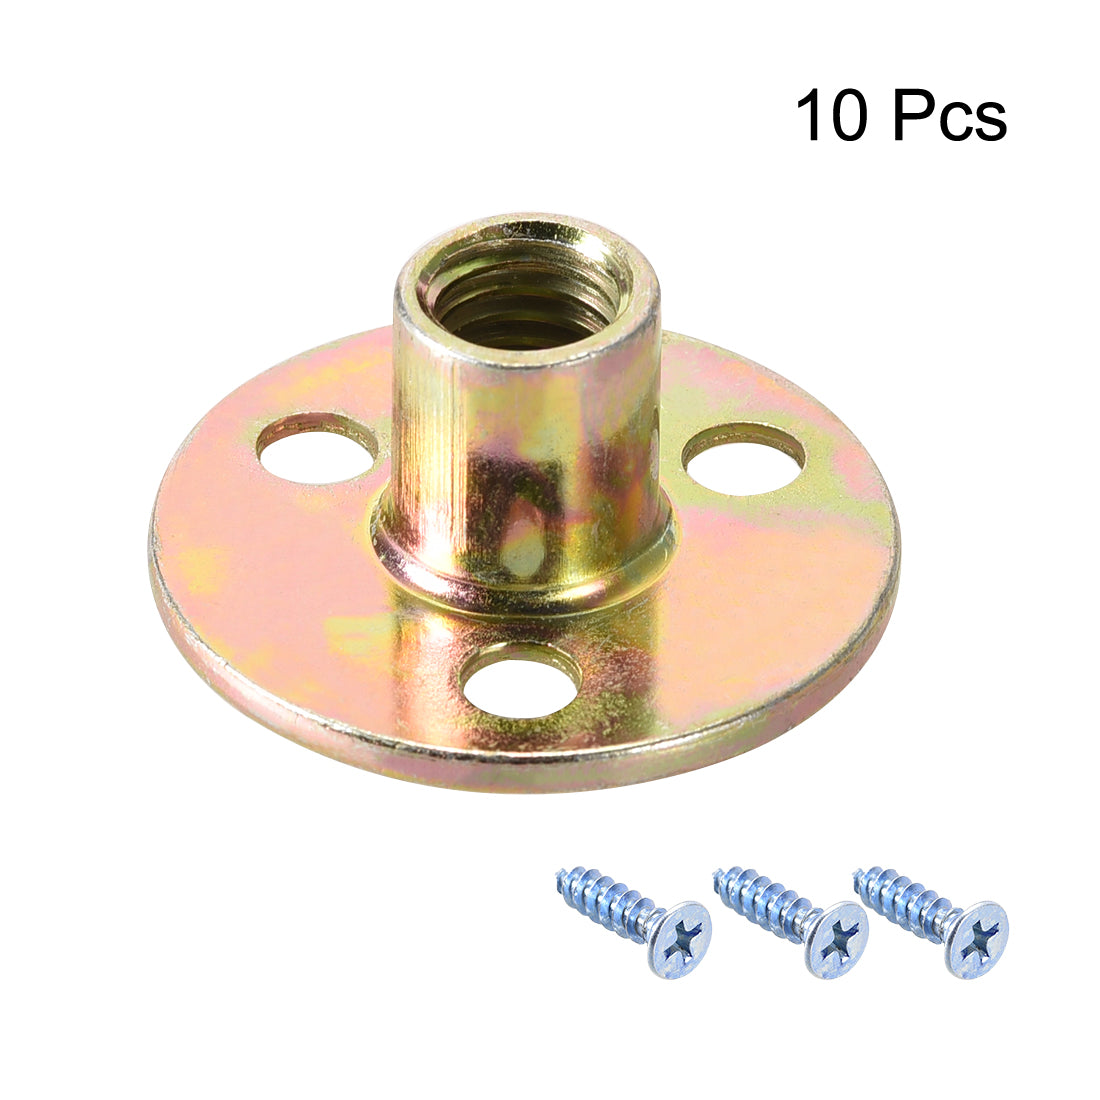 Uxcell Uxcell M10 Brad Hole Tee Nut Carbon Steel T-Nuts Furniture Hardware Flange Insert Female Thread with Screws 10pcs